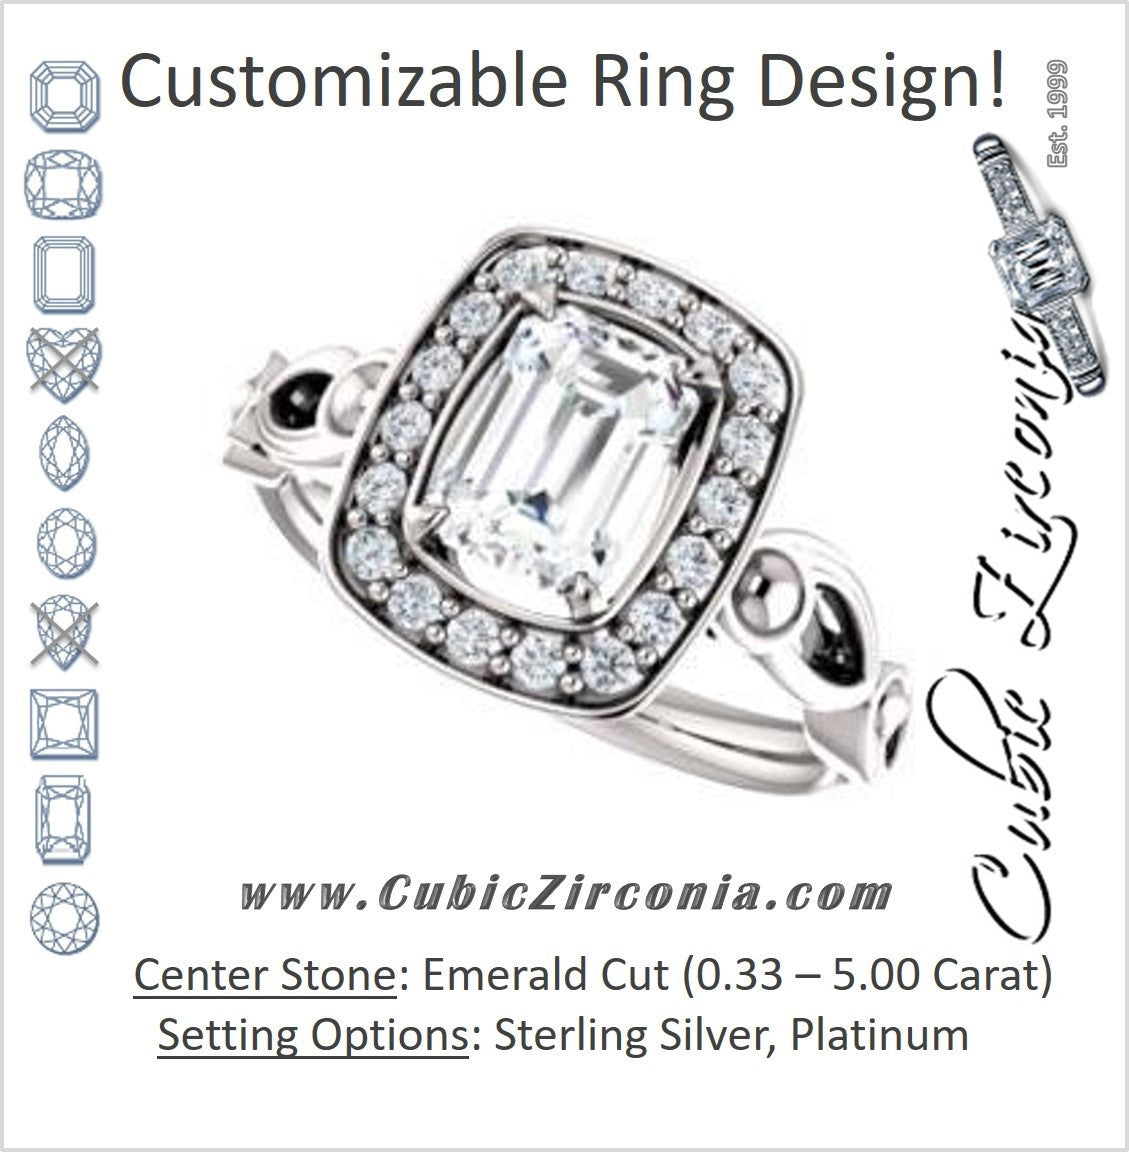 Cubic Zirconia Engagement Ring- The Deb (Customizable Emerald Cut Design with Large Halo, Fleur-de-lis Trellis and Bubbled Infinity Band)